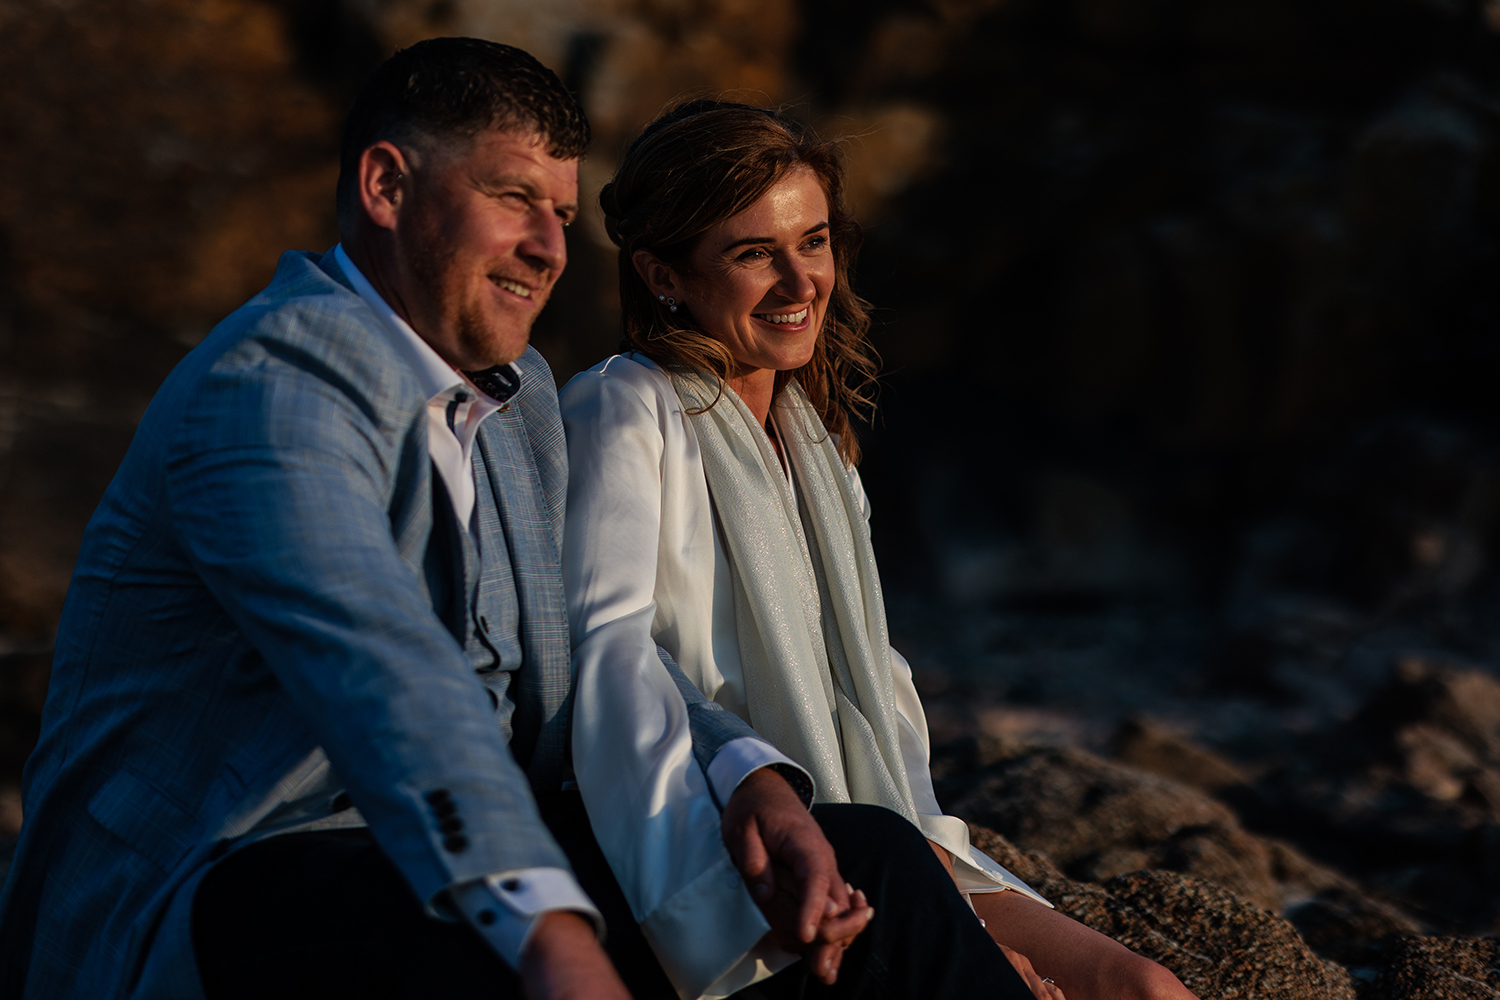 joyful elopement photography by Catherine Hill, photographed at St Ouen's Bay, Jersey